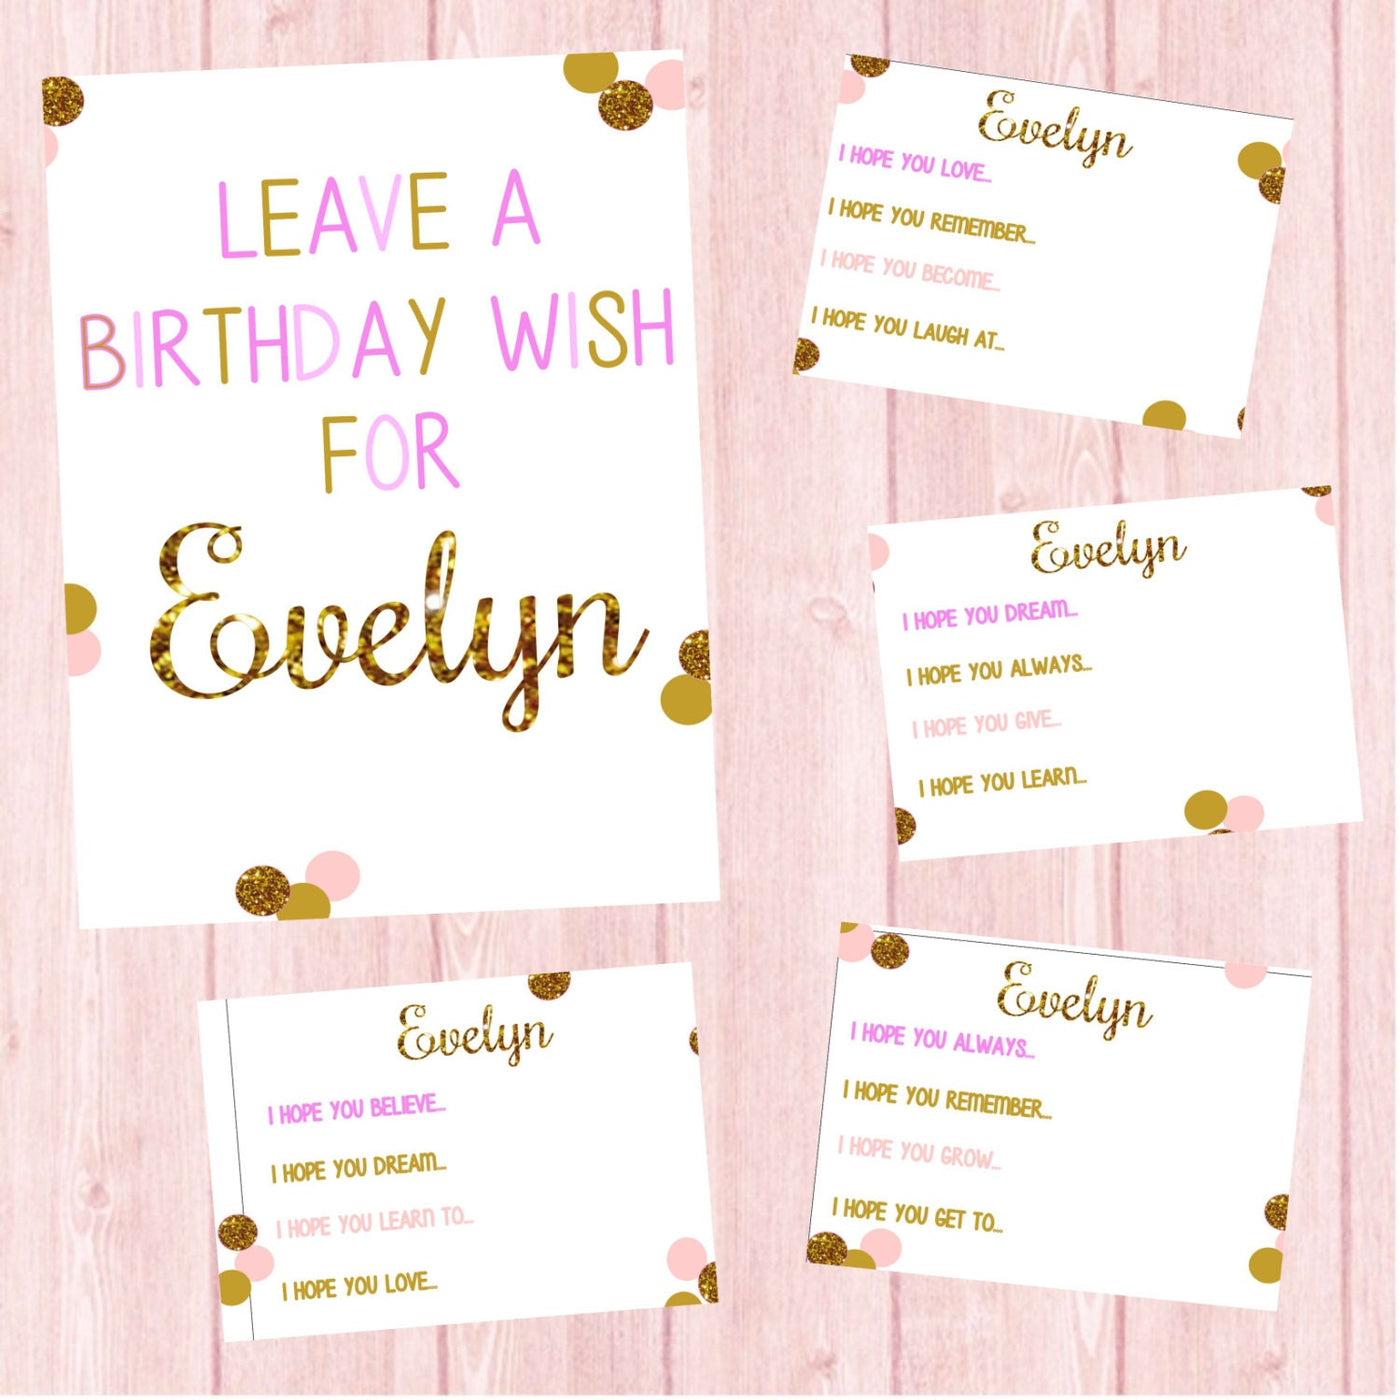 Birthday Wish Cards, Birthday Questions, Black & Gold Glitter, Birthday Party Wishes, Baby Shower Advice Card, Black and Gold Birthday Decor